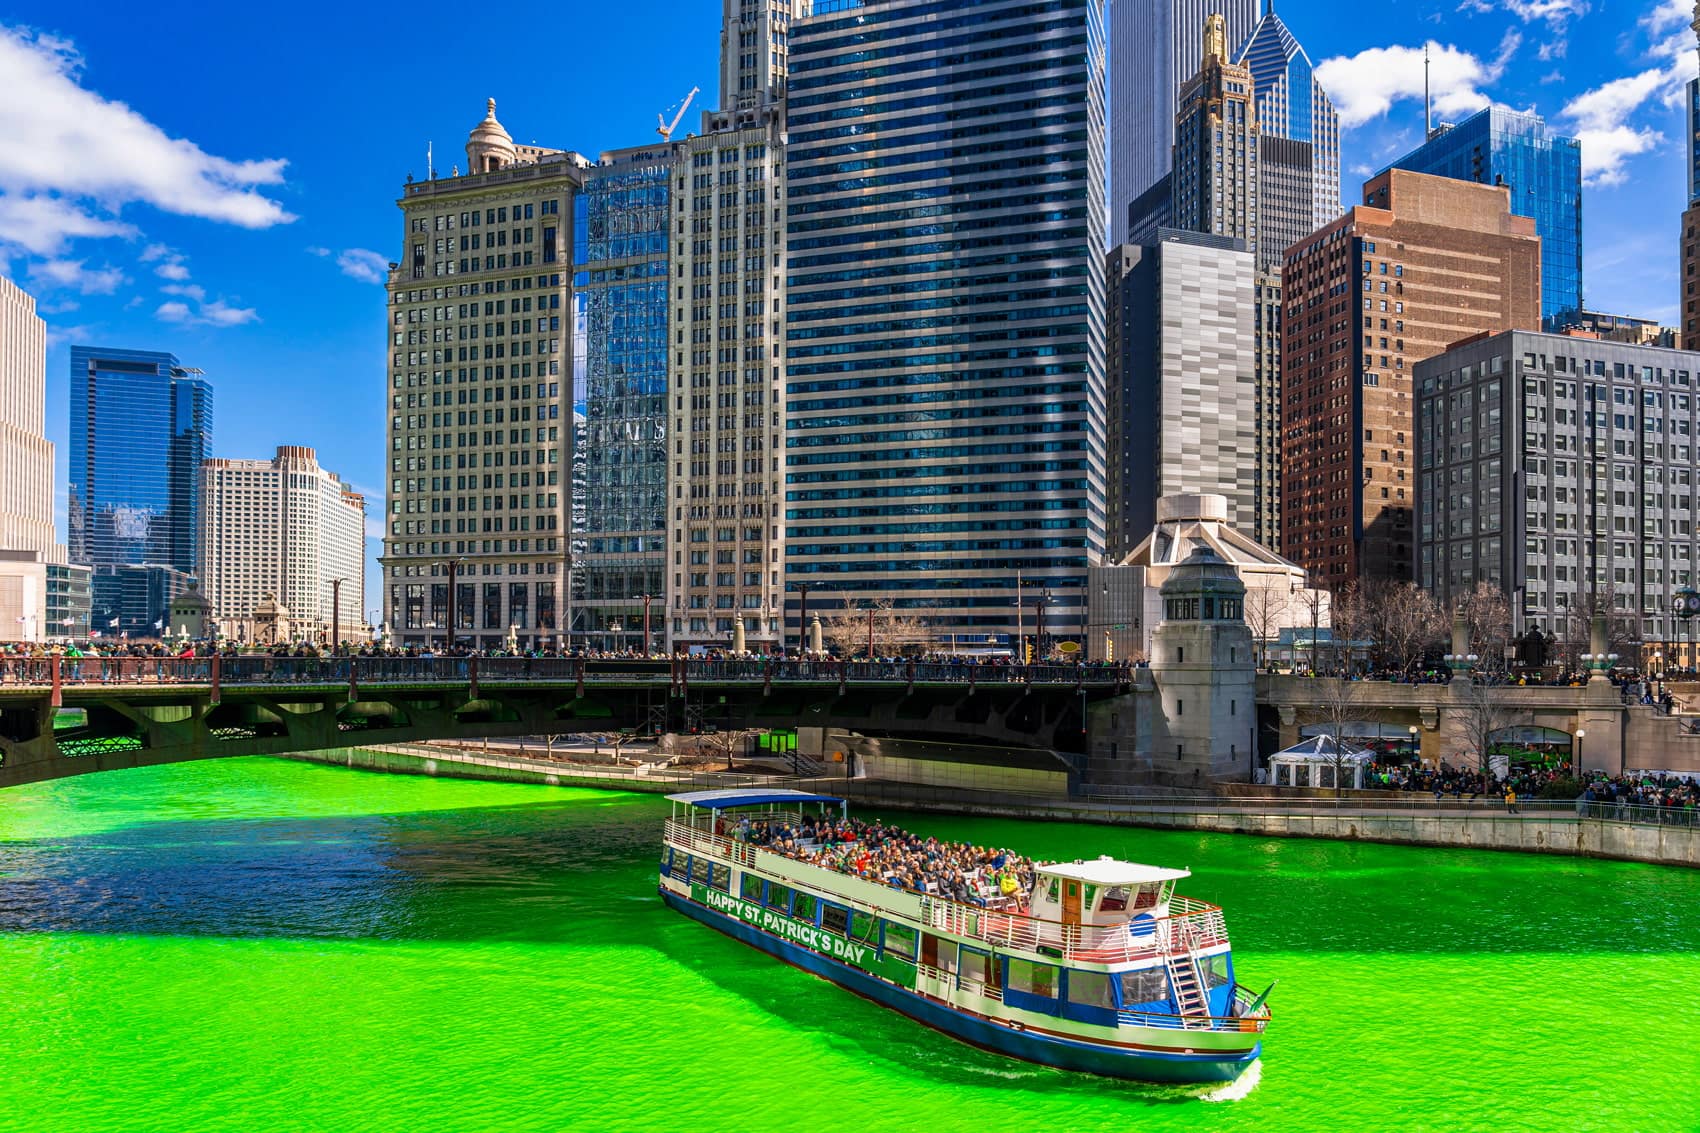 Chicago River green for St. Patrick’s Day